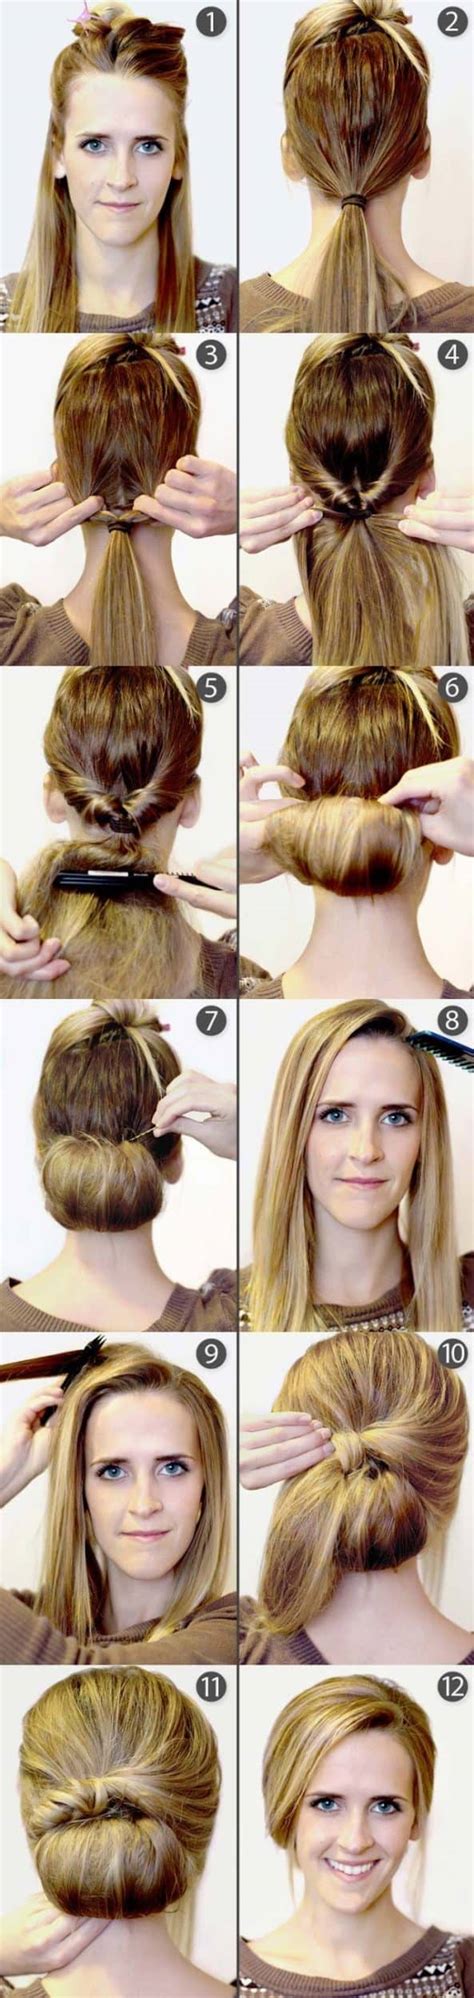 Hair style pictures can be great tools for anyone interested in a new look. Quick And Easy Step-By-Step Hairstyles For Beginners